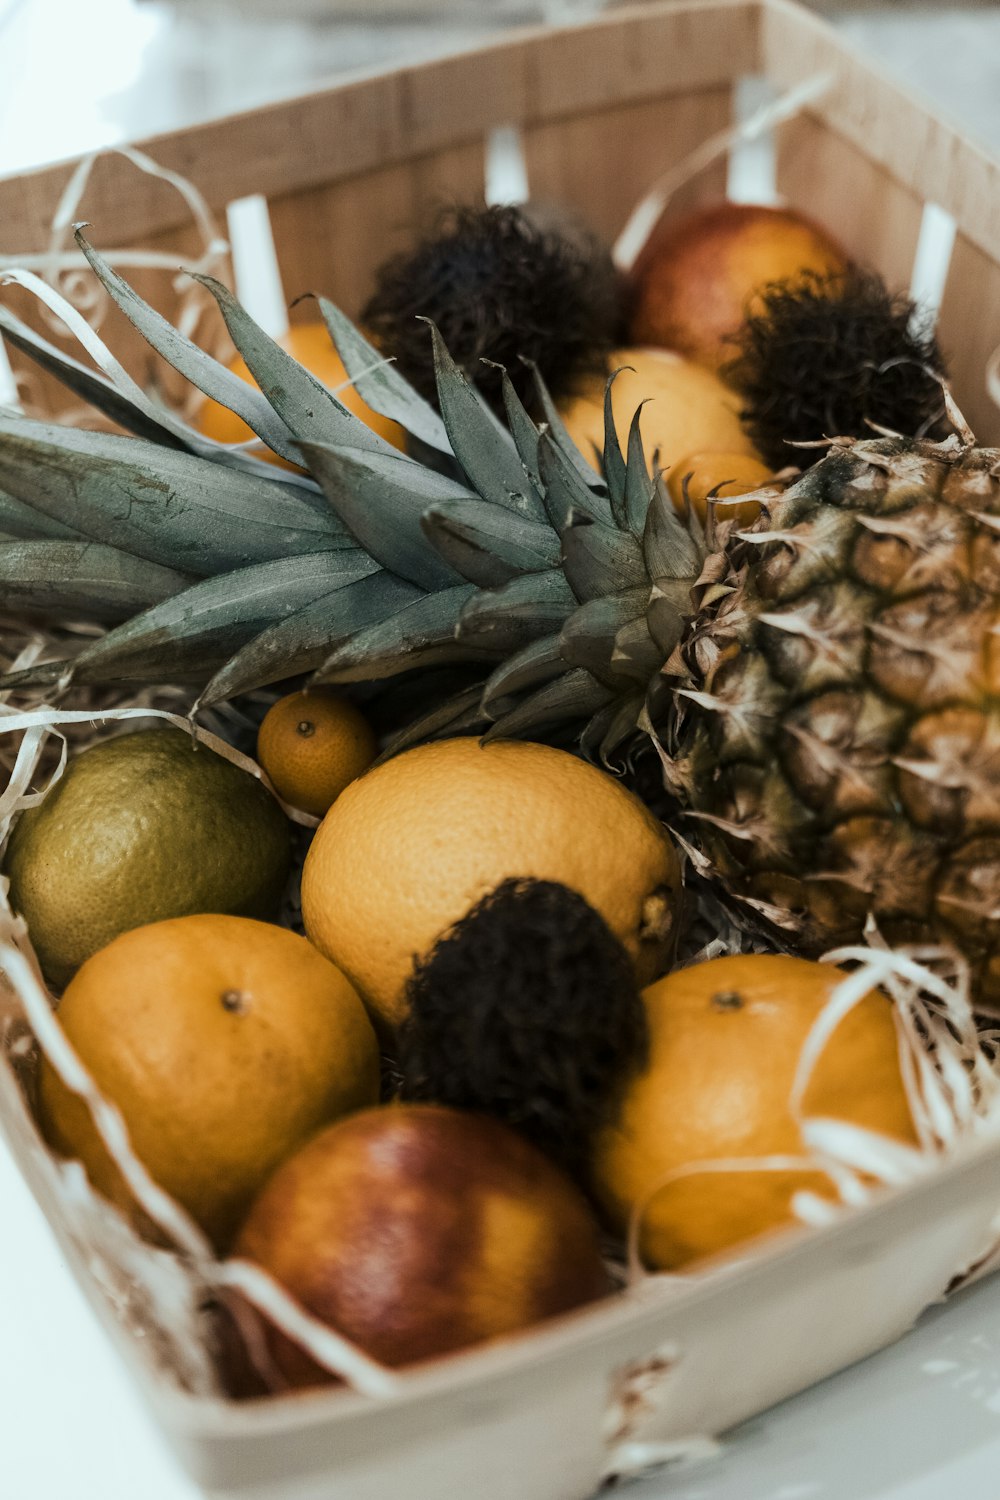 a pineapple, oranges, and other fruit in a box